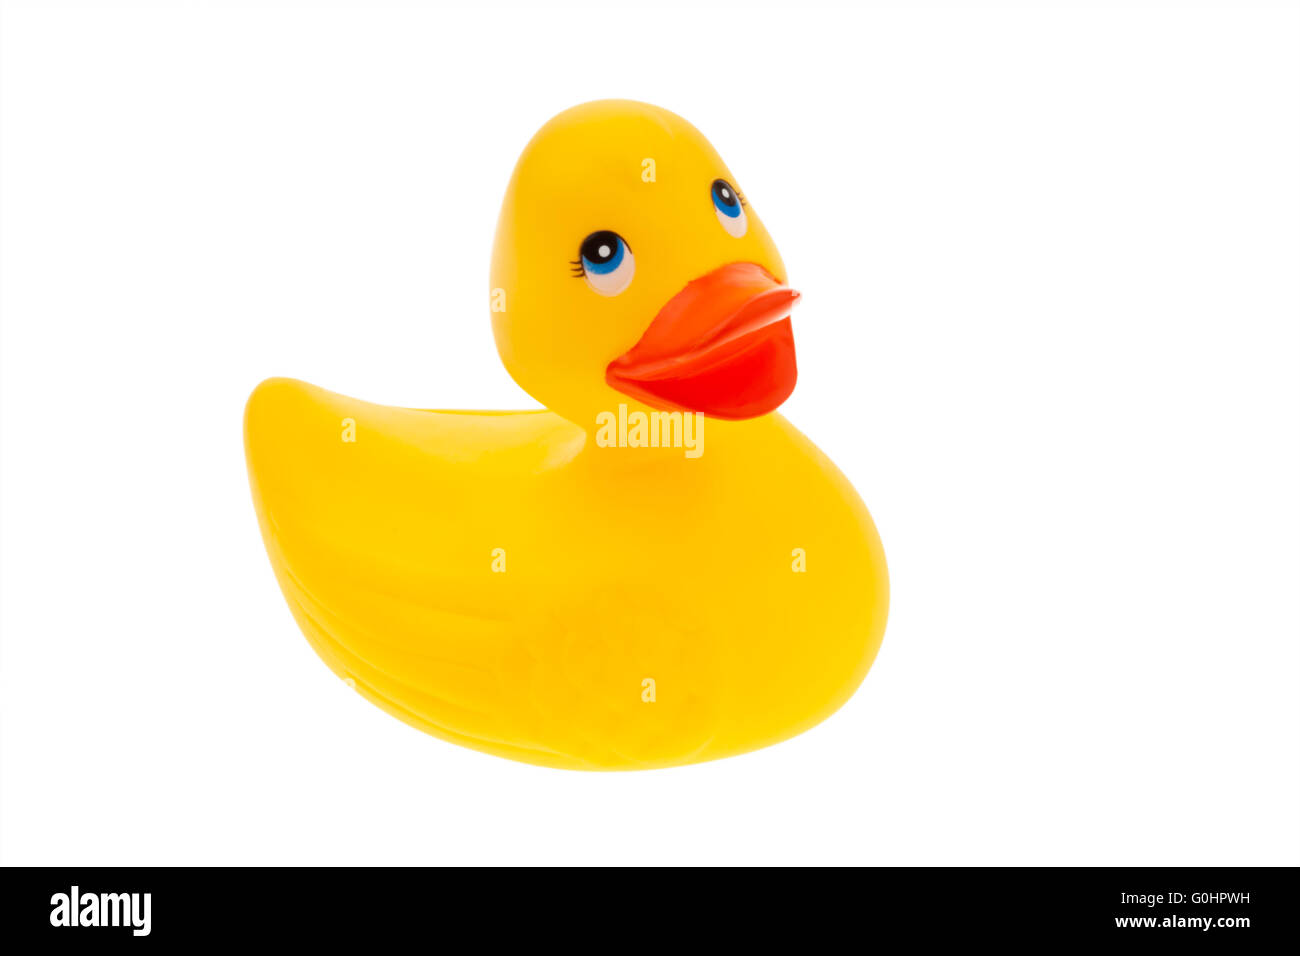 yellow rubber duck on white background isolated Stock Photo